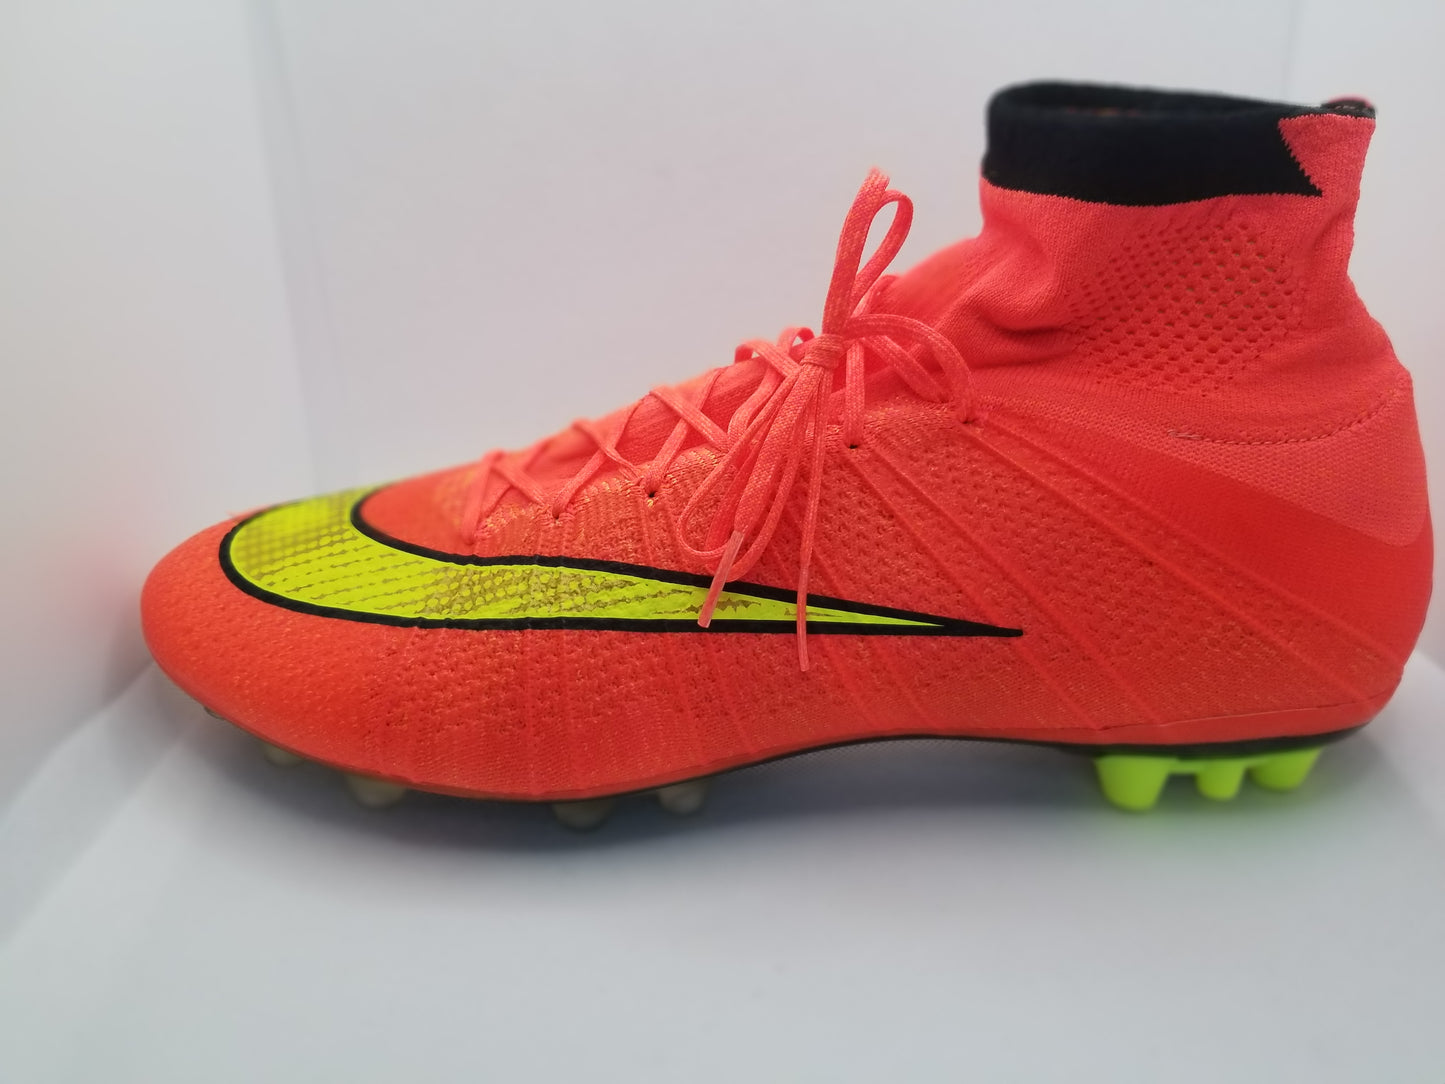 Mercurial AG Nyong Boots